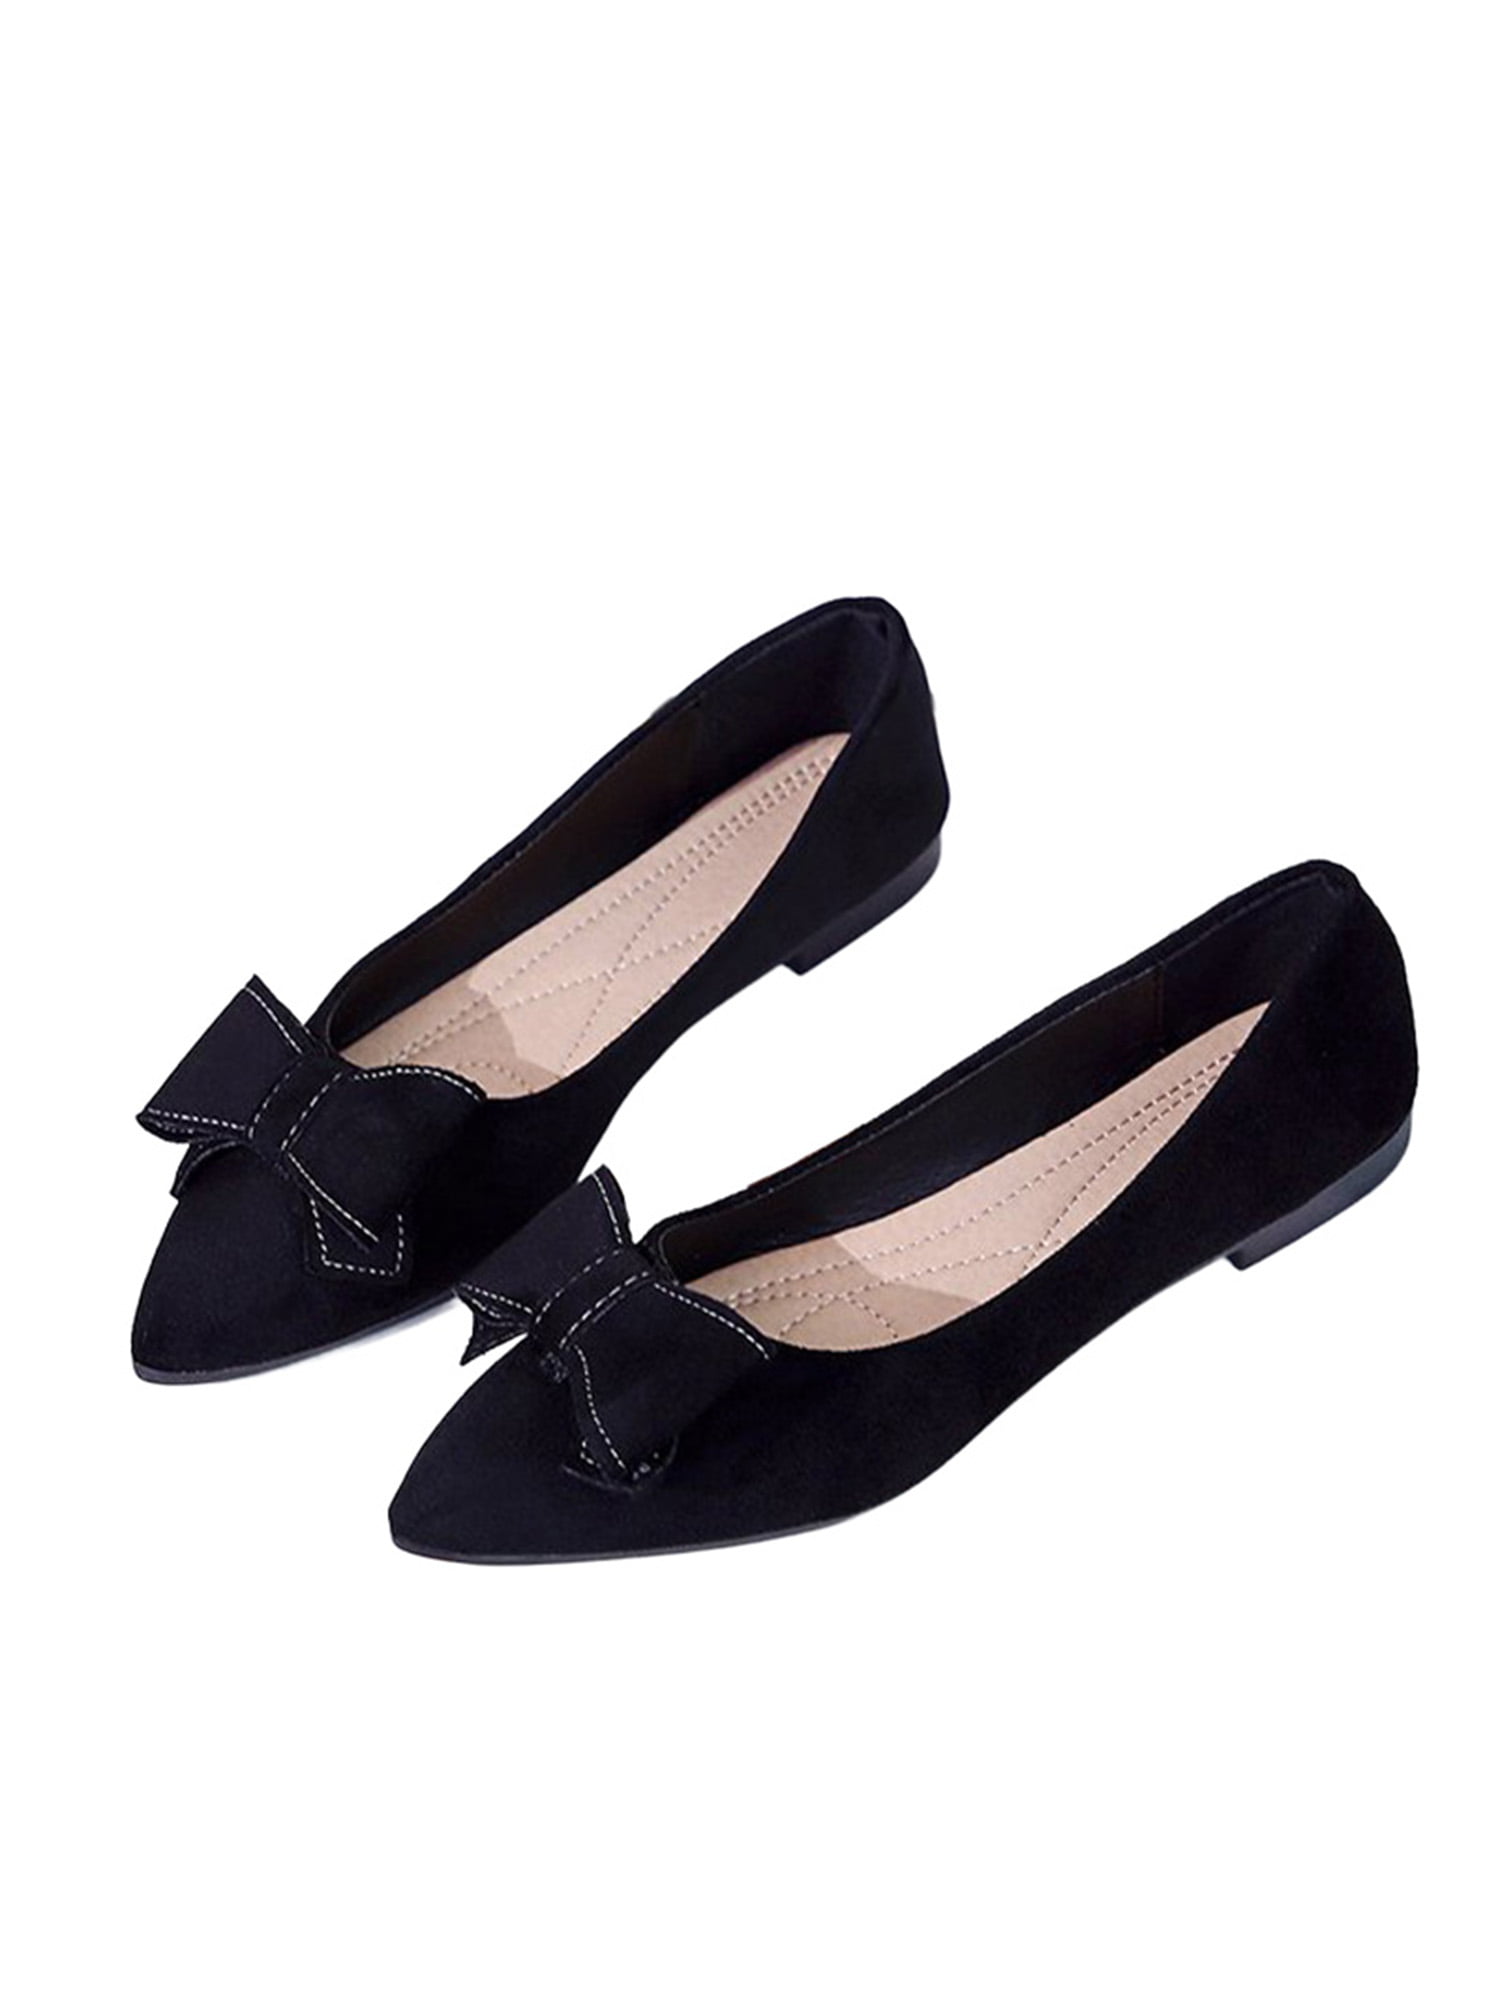 Women Summer OL Flats Shoes Leisure Pointy Toe Loafers Slip On Transparent Shoes